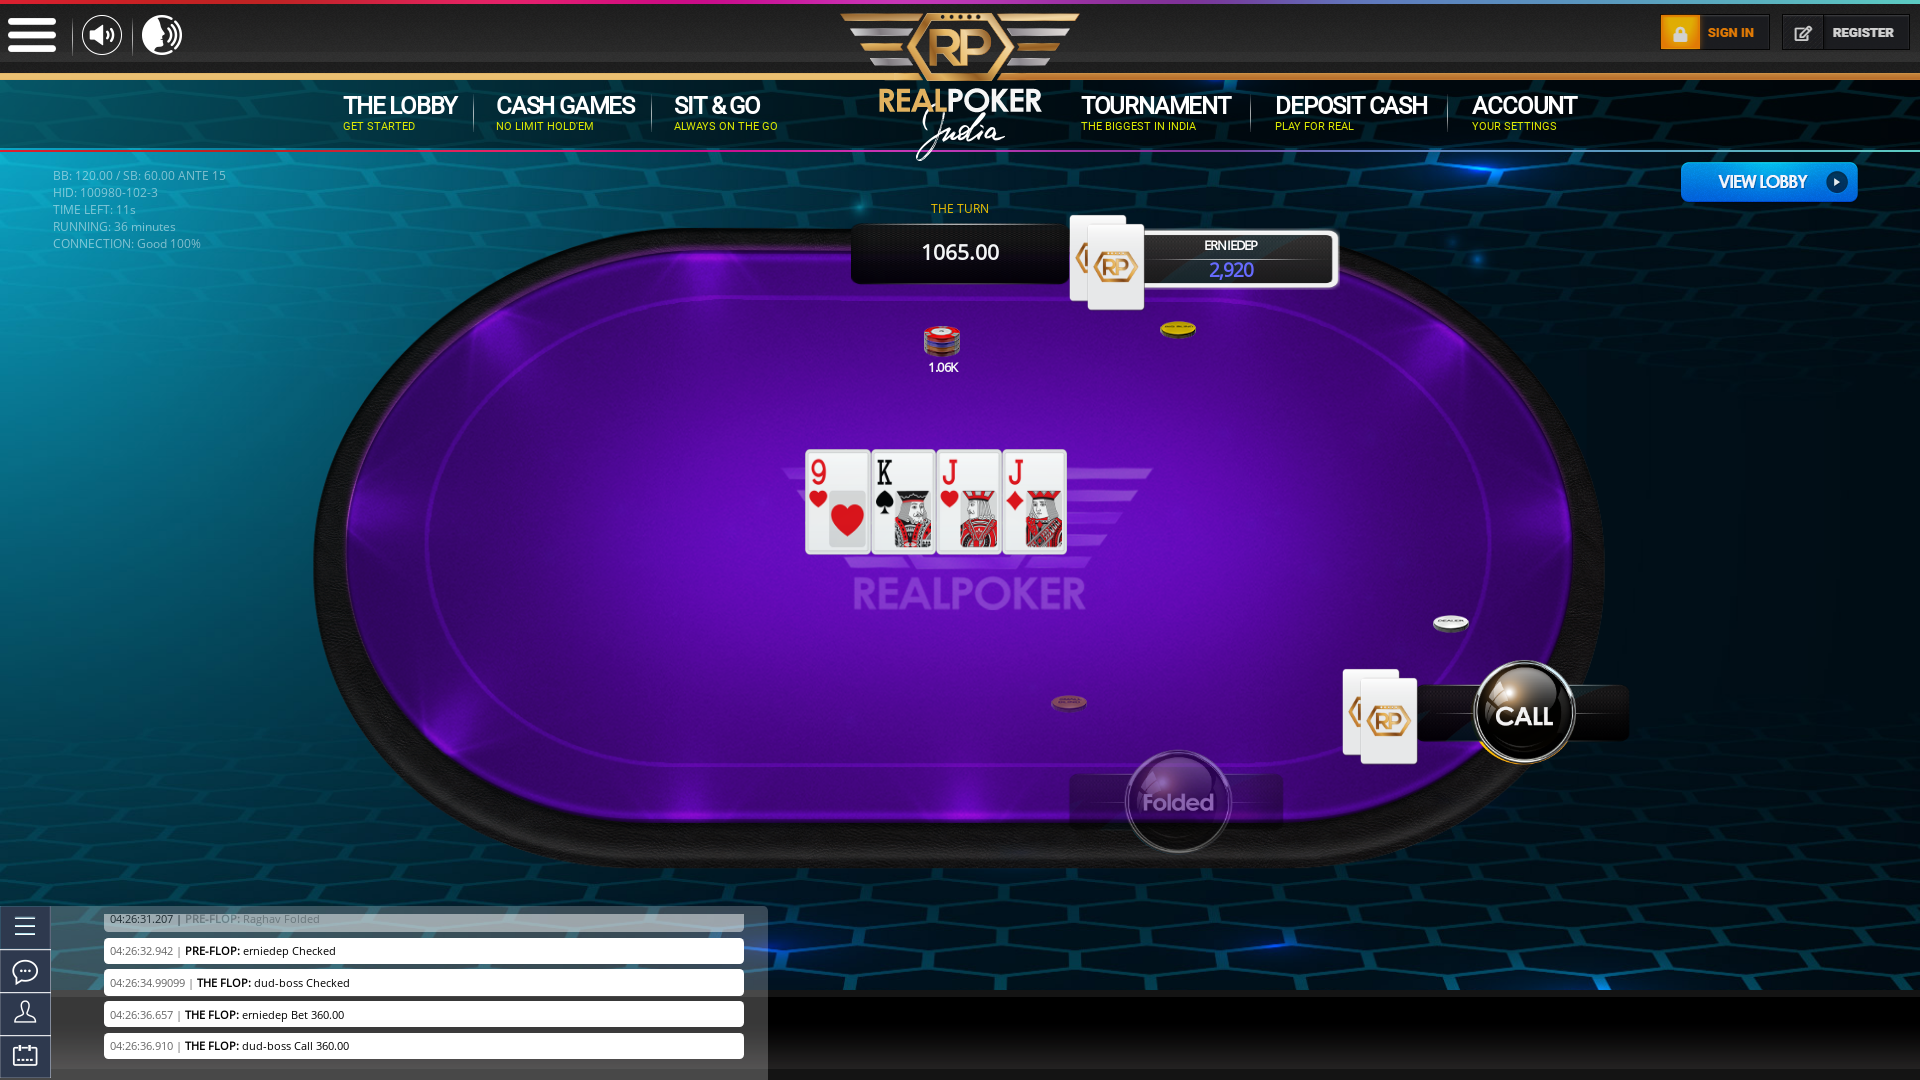 Delhi online poker game on a 10 player table in the 36th minute of the meeting